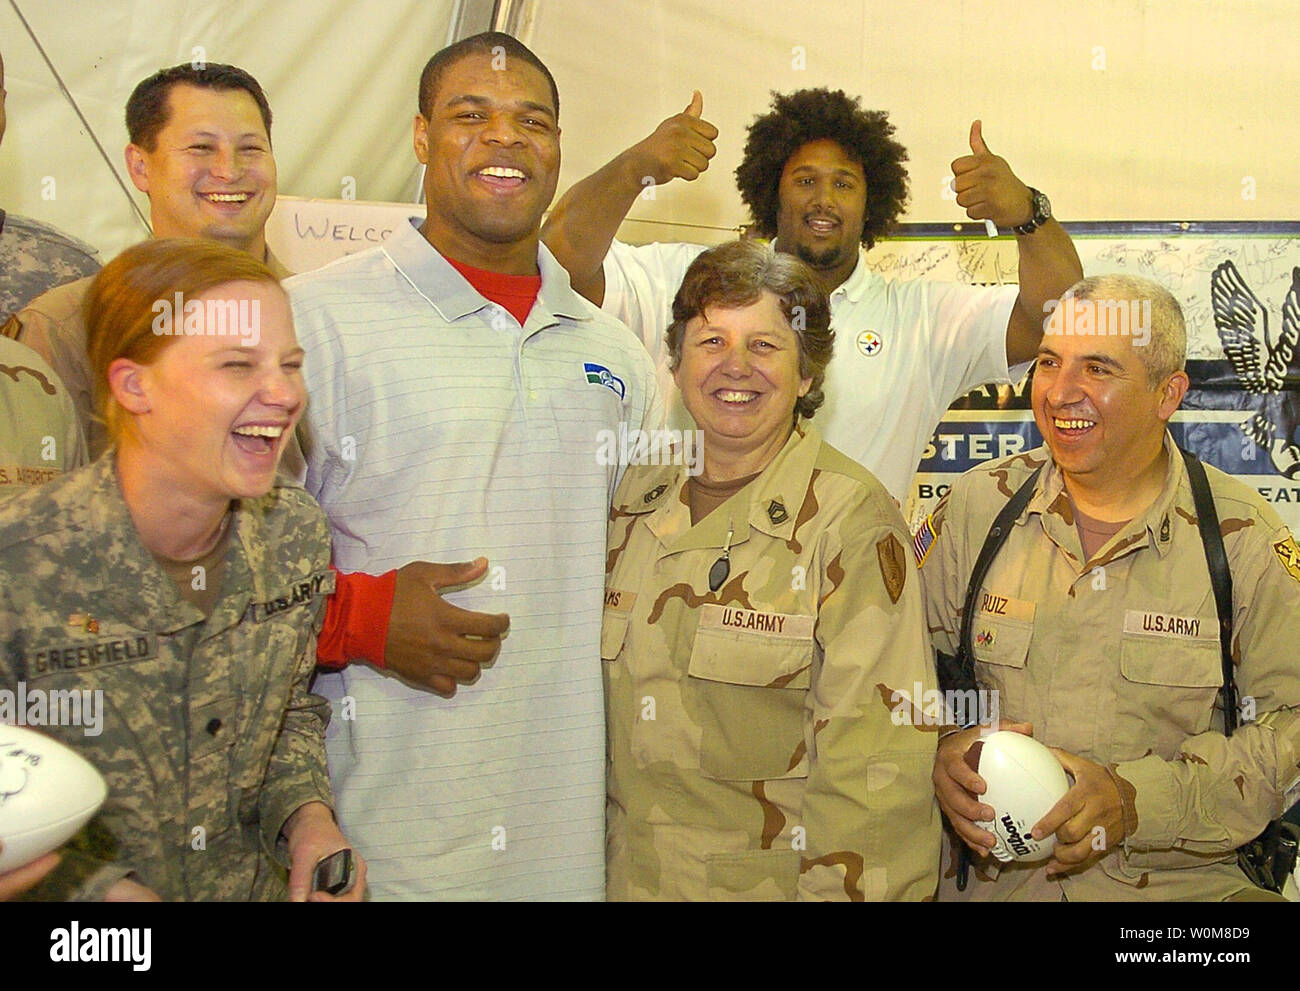 Pittsburgh Steelers Max Starks (background) crashes a group photo of Seattle Seahawks Bryce Fisher and military Seahawks fans during a USO visit to Camp Eggers in Kabul, Afghanistan on April 4, 2006.  Fisher was joined by MSgt. Traci Williams (C), who is the Seahawks' Military Liason and is now deployed in Afghanistan. US troops Spc. Jessica Greenfield (L), Evansville, IN and MSgt. Jesus Ruiz (R), San Antonio, TX joined in. The USO and NFL are marking a 40-year relationship of supporting US military with morale-boosting visits around the world.   (UPI Photo/Mike Theiler/USO) Stock Photo